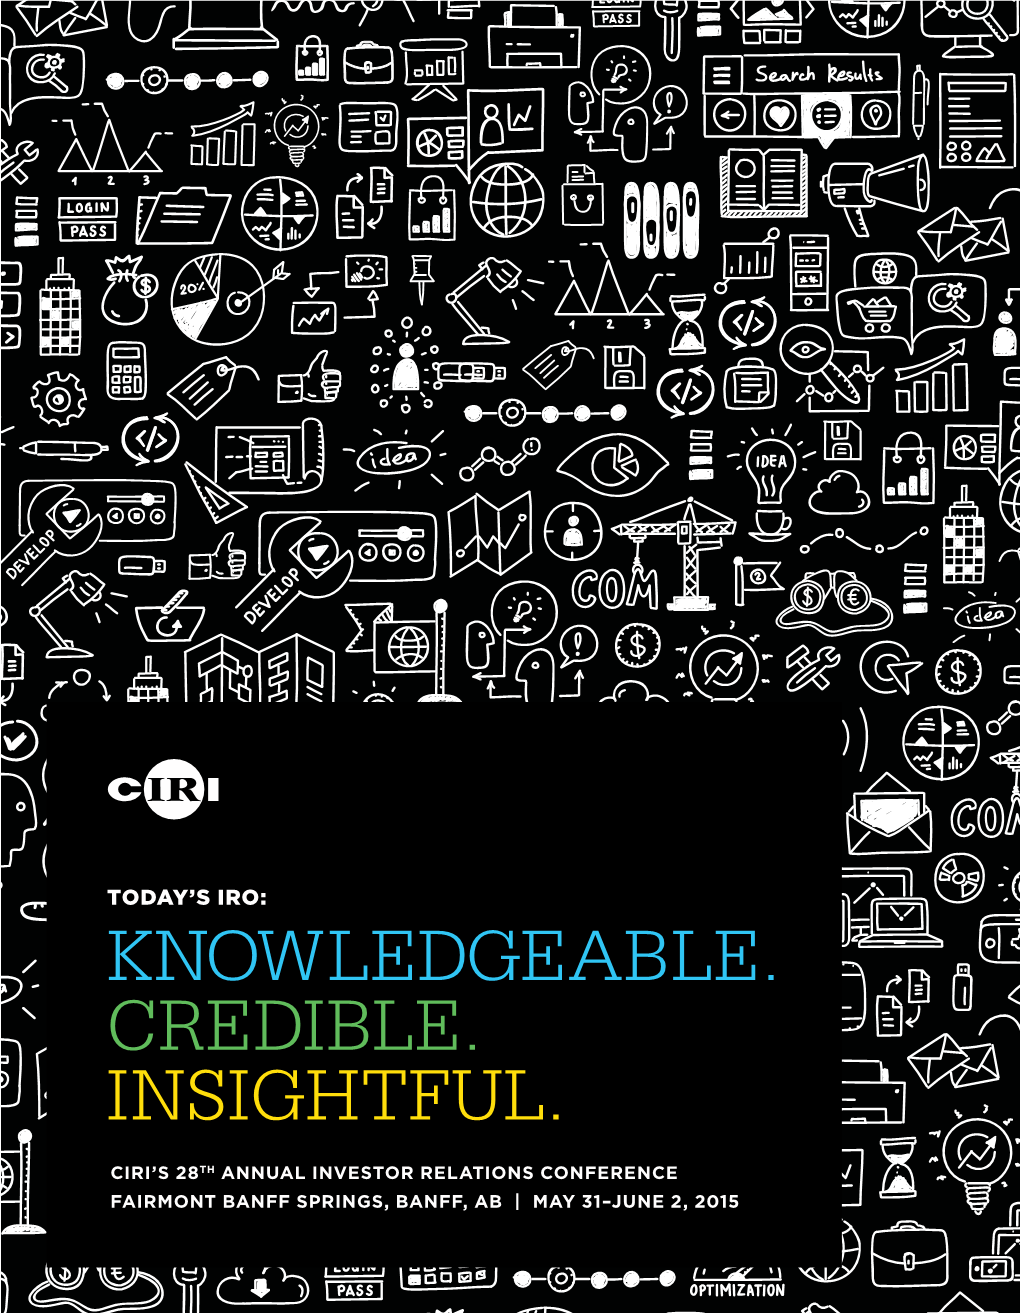 Knowledgeable. Credible. Insightful